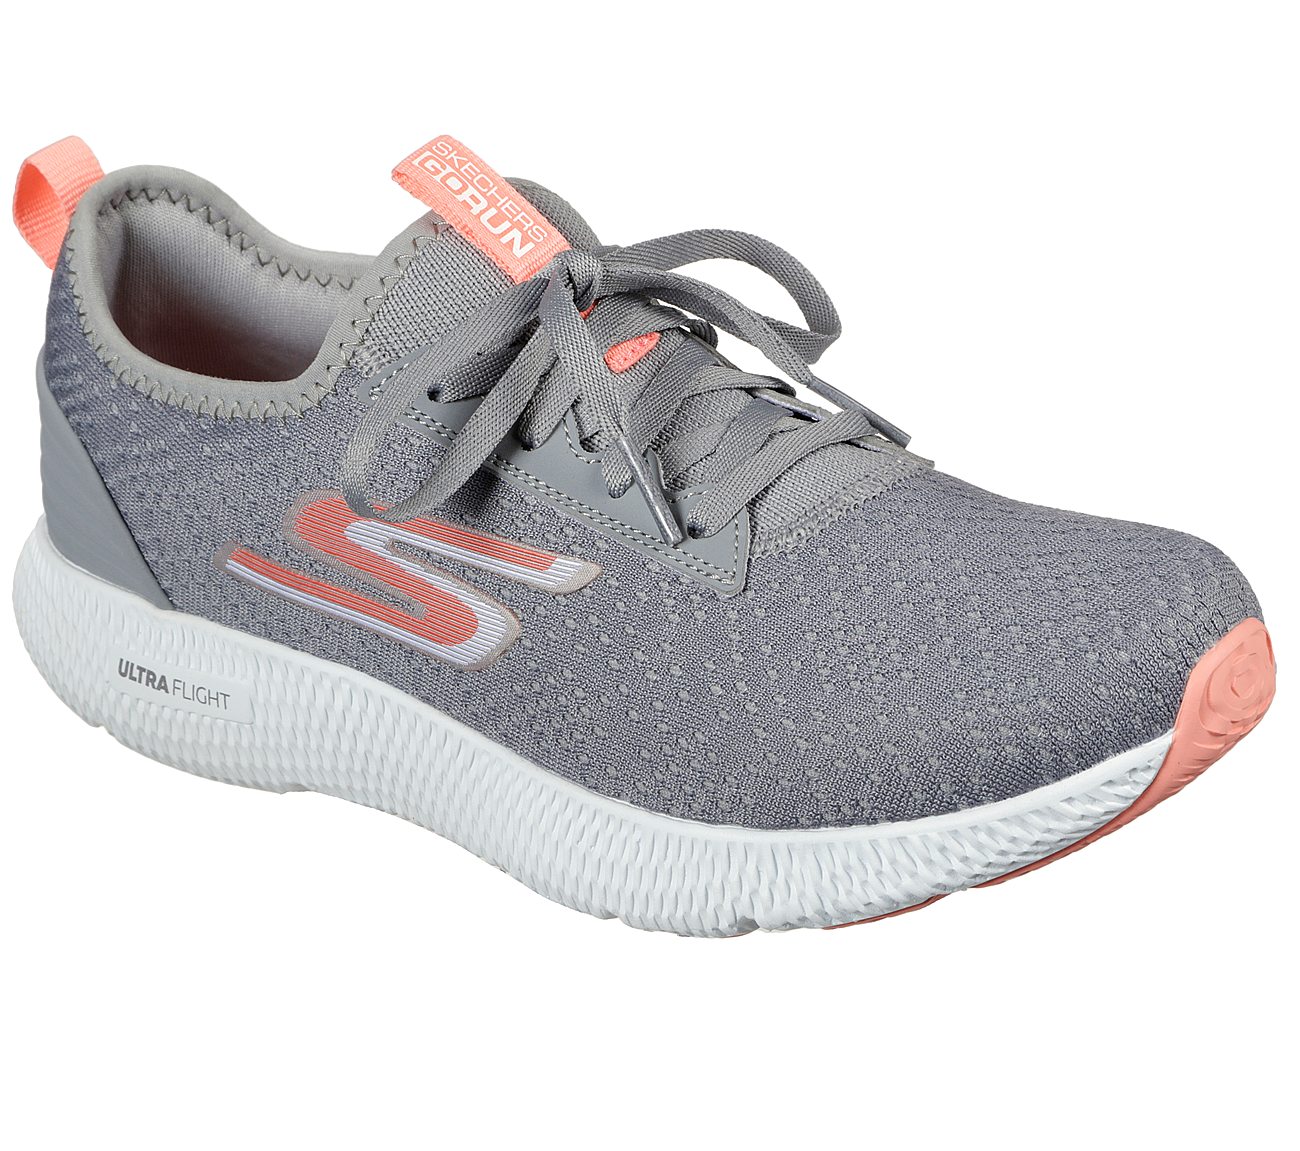 HORIZON - COOL IT, GREY/CORAL Footwear Right View